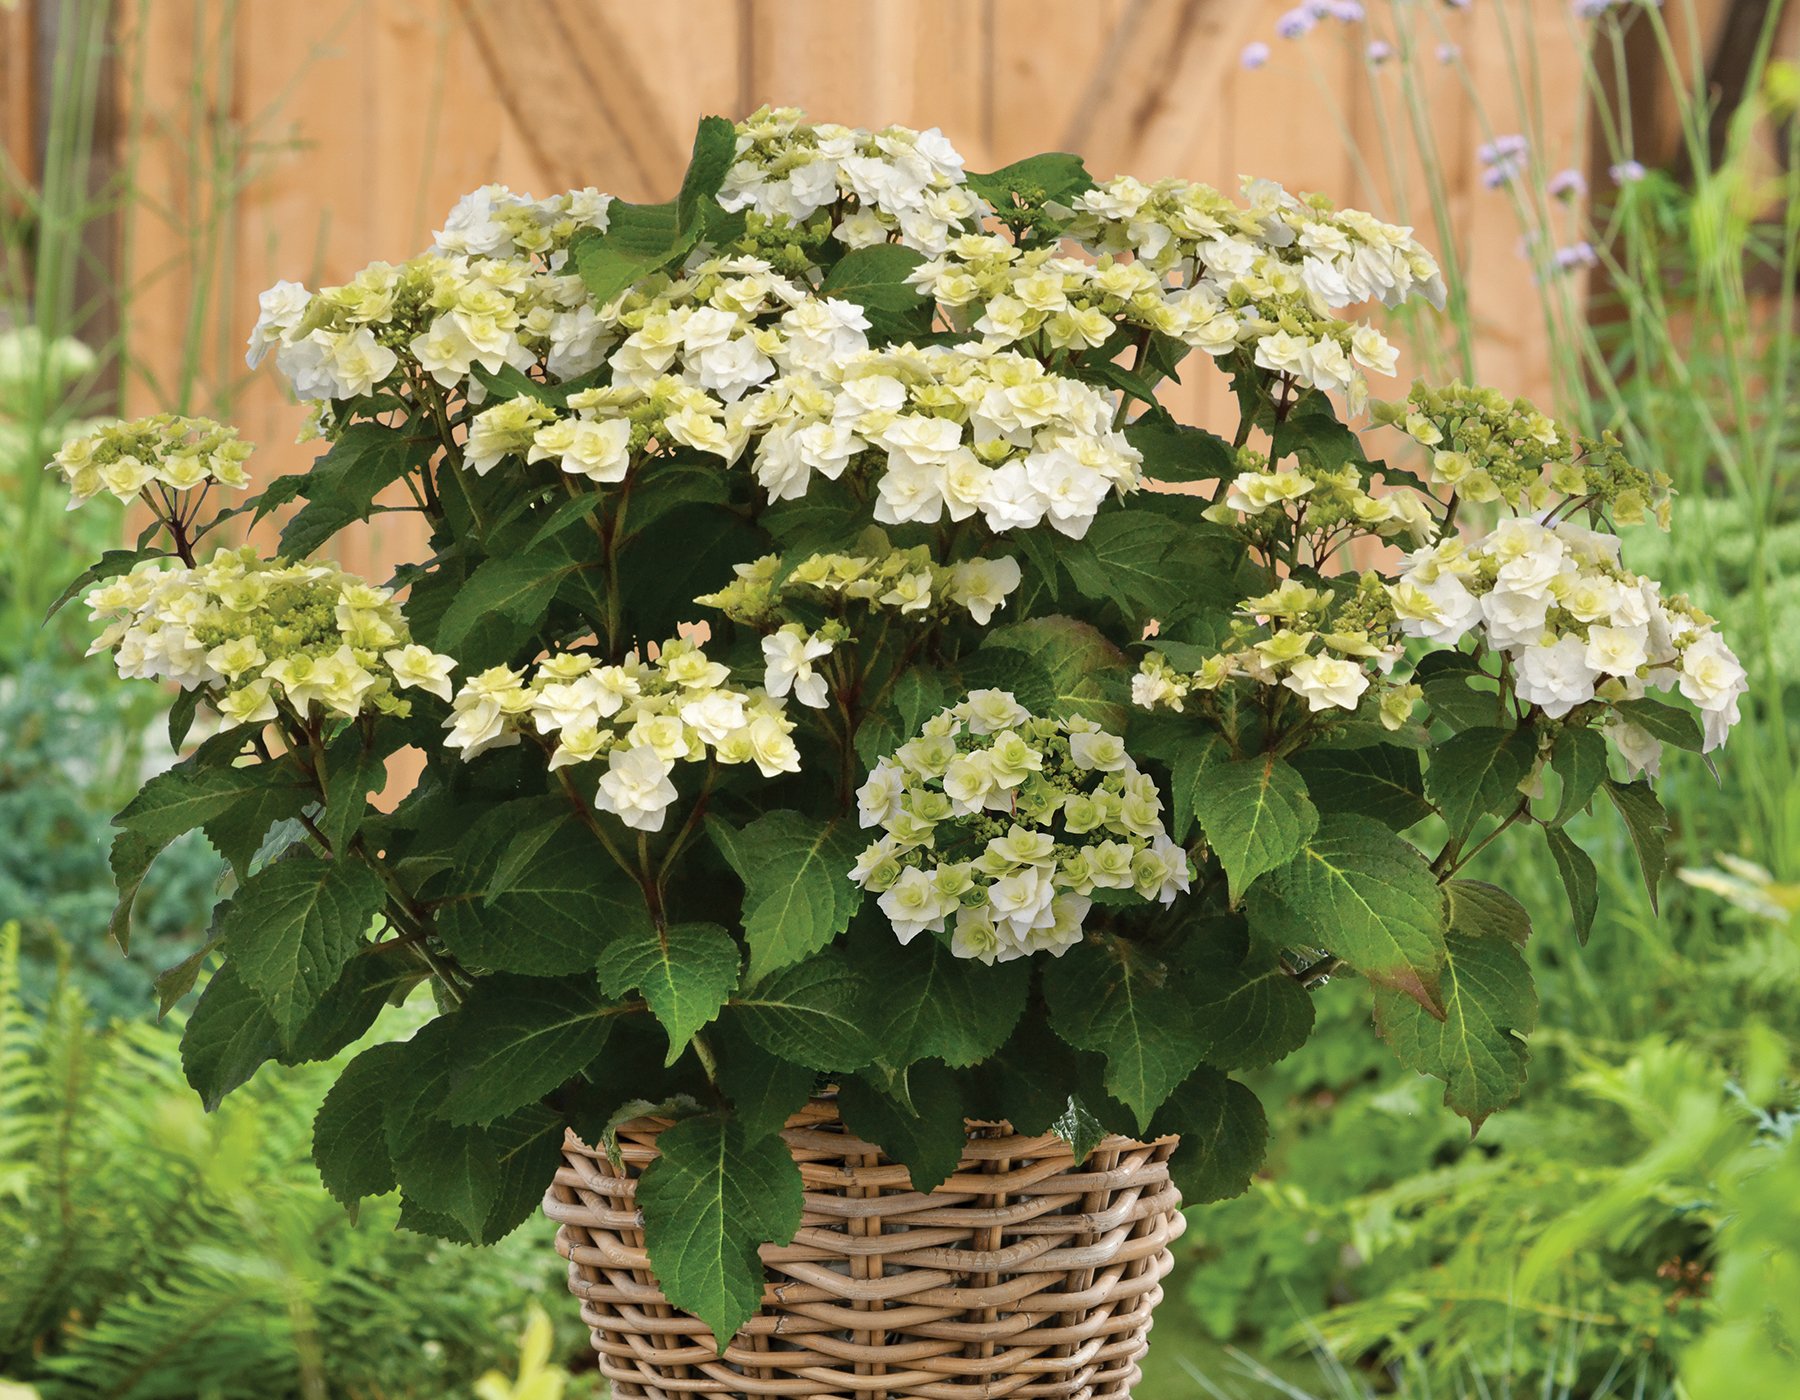 The Wedding Gown Hydrangea: The Perfect Flower For Your Big Day ...